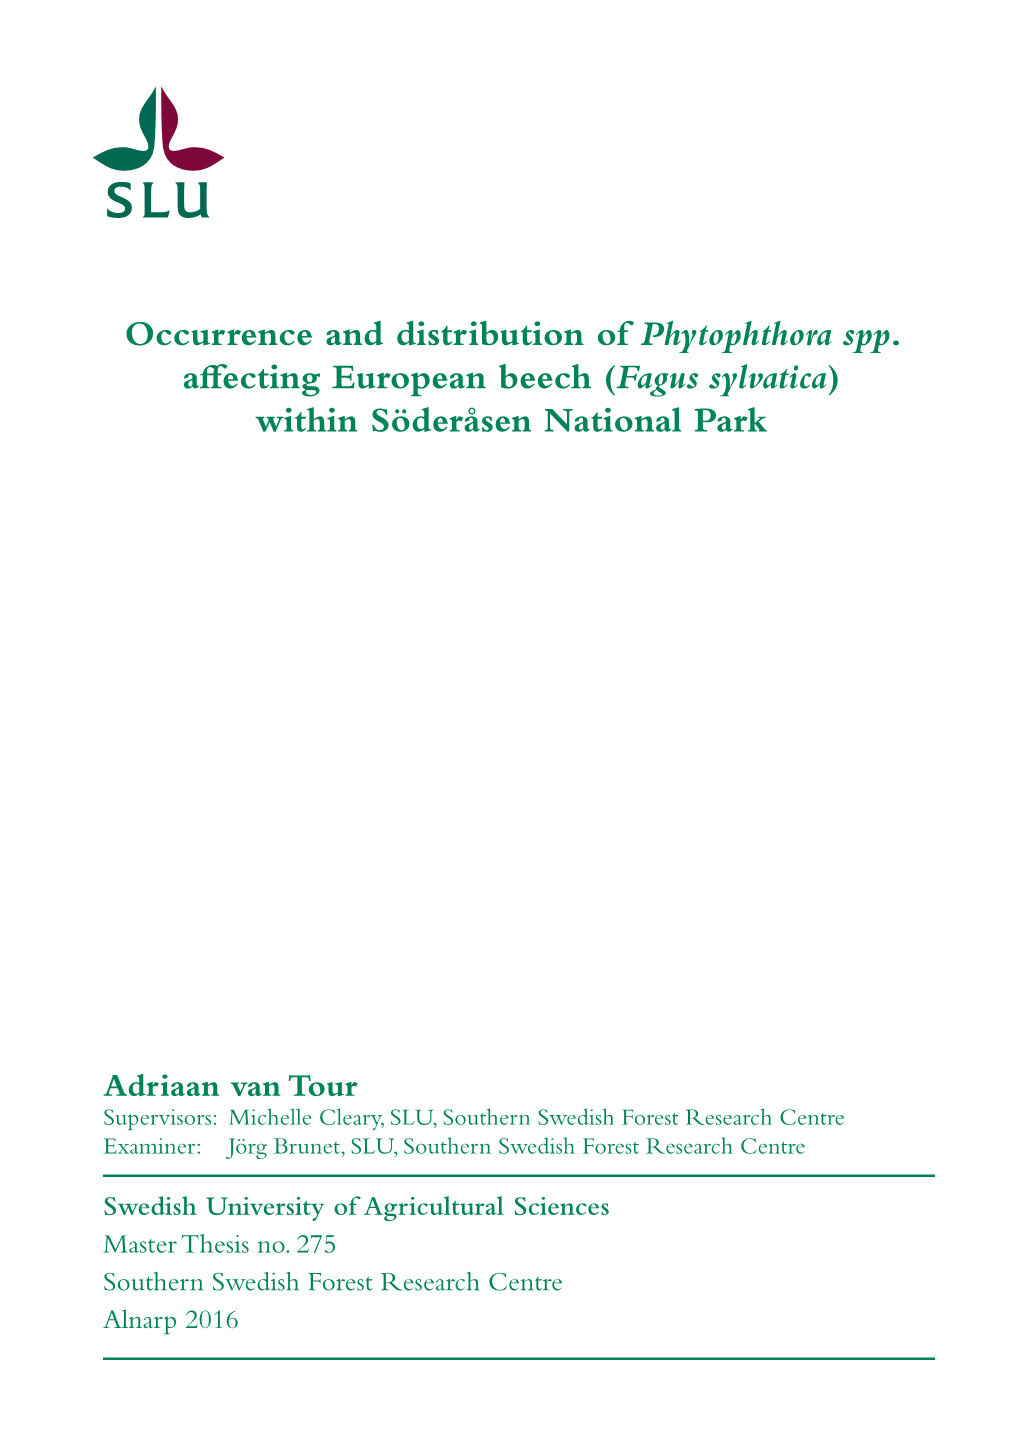 Occurrence and Distribution of Phytophthora Spp. Affecting European Beech (Fagus Sylvatica) Within Söderåsen National Park